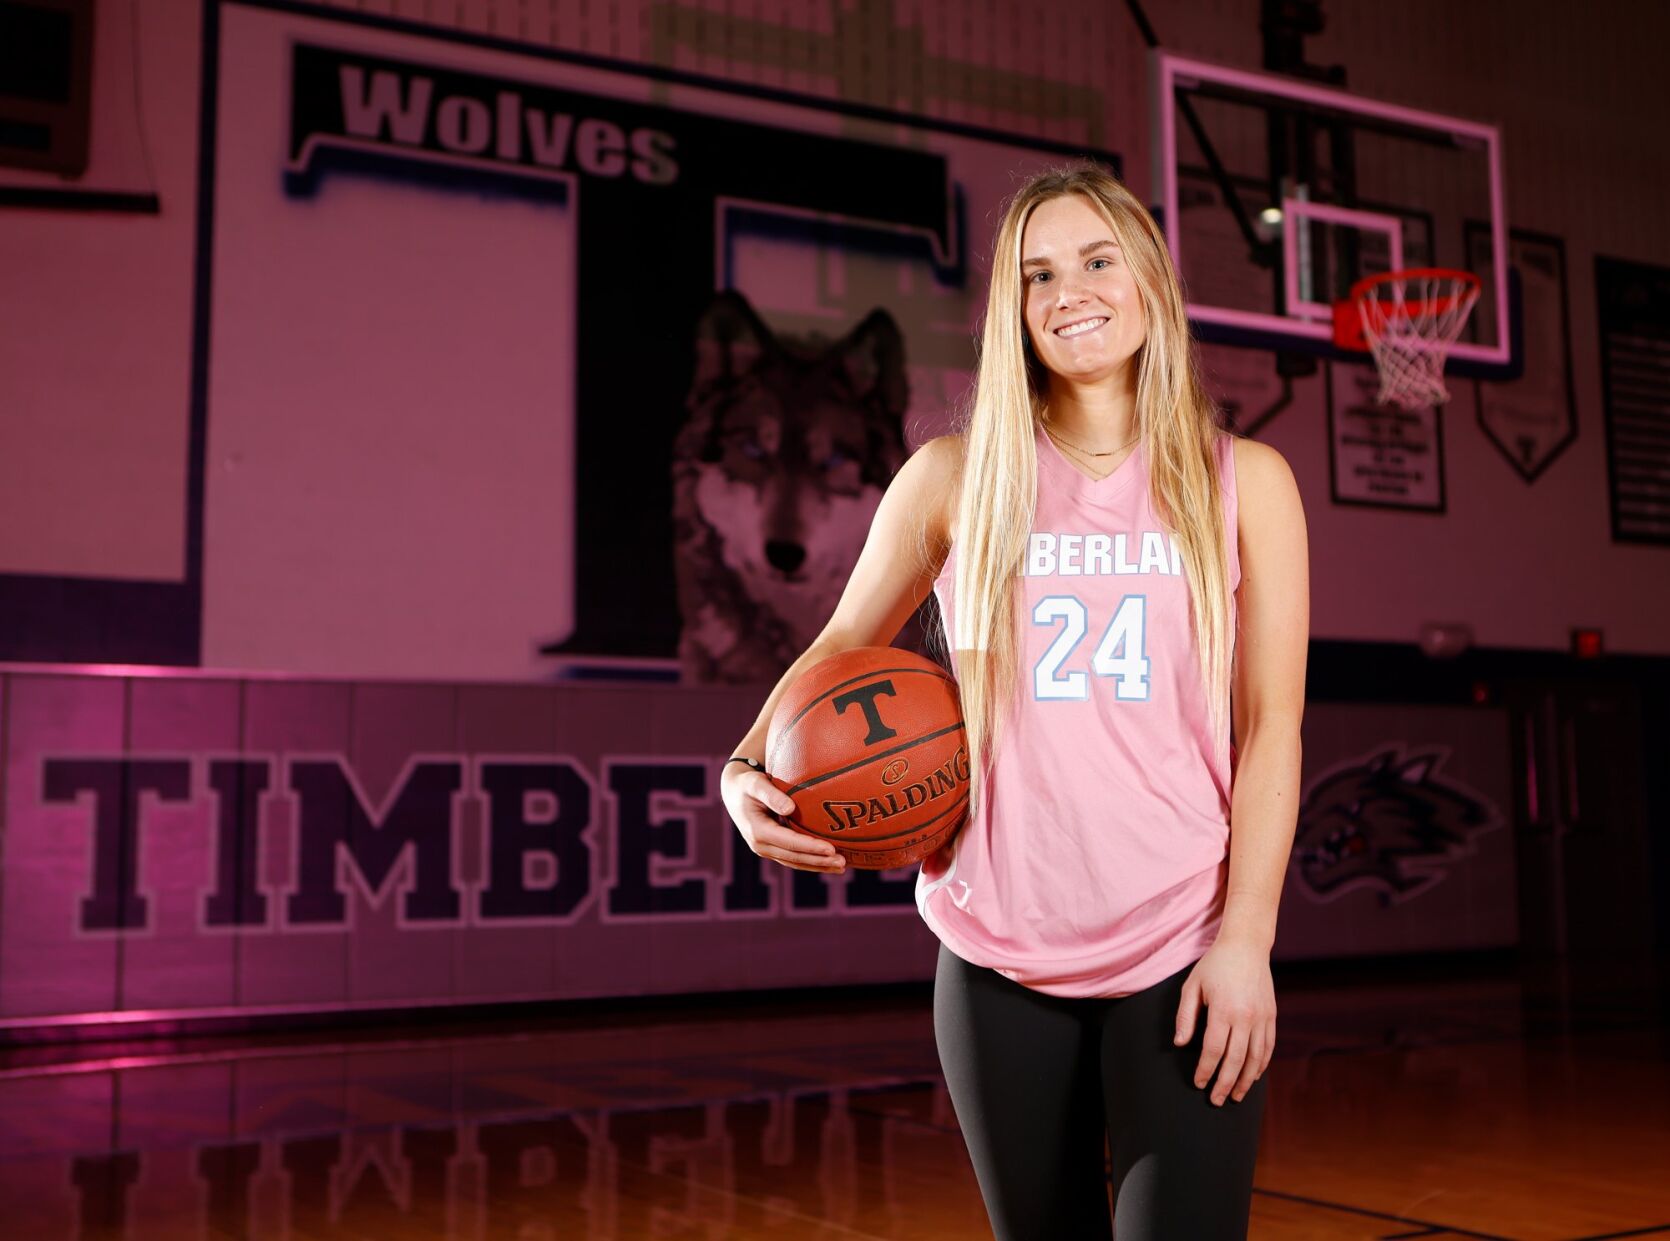 Girls basketball spotlight: Timberland’s Wilmsmeyer never misses a beat on the court after overcoming cancer battle